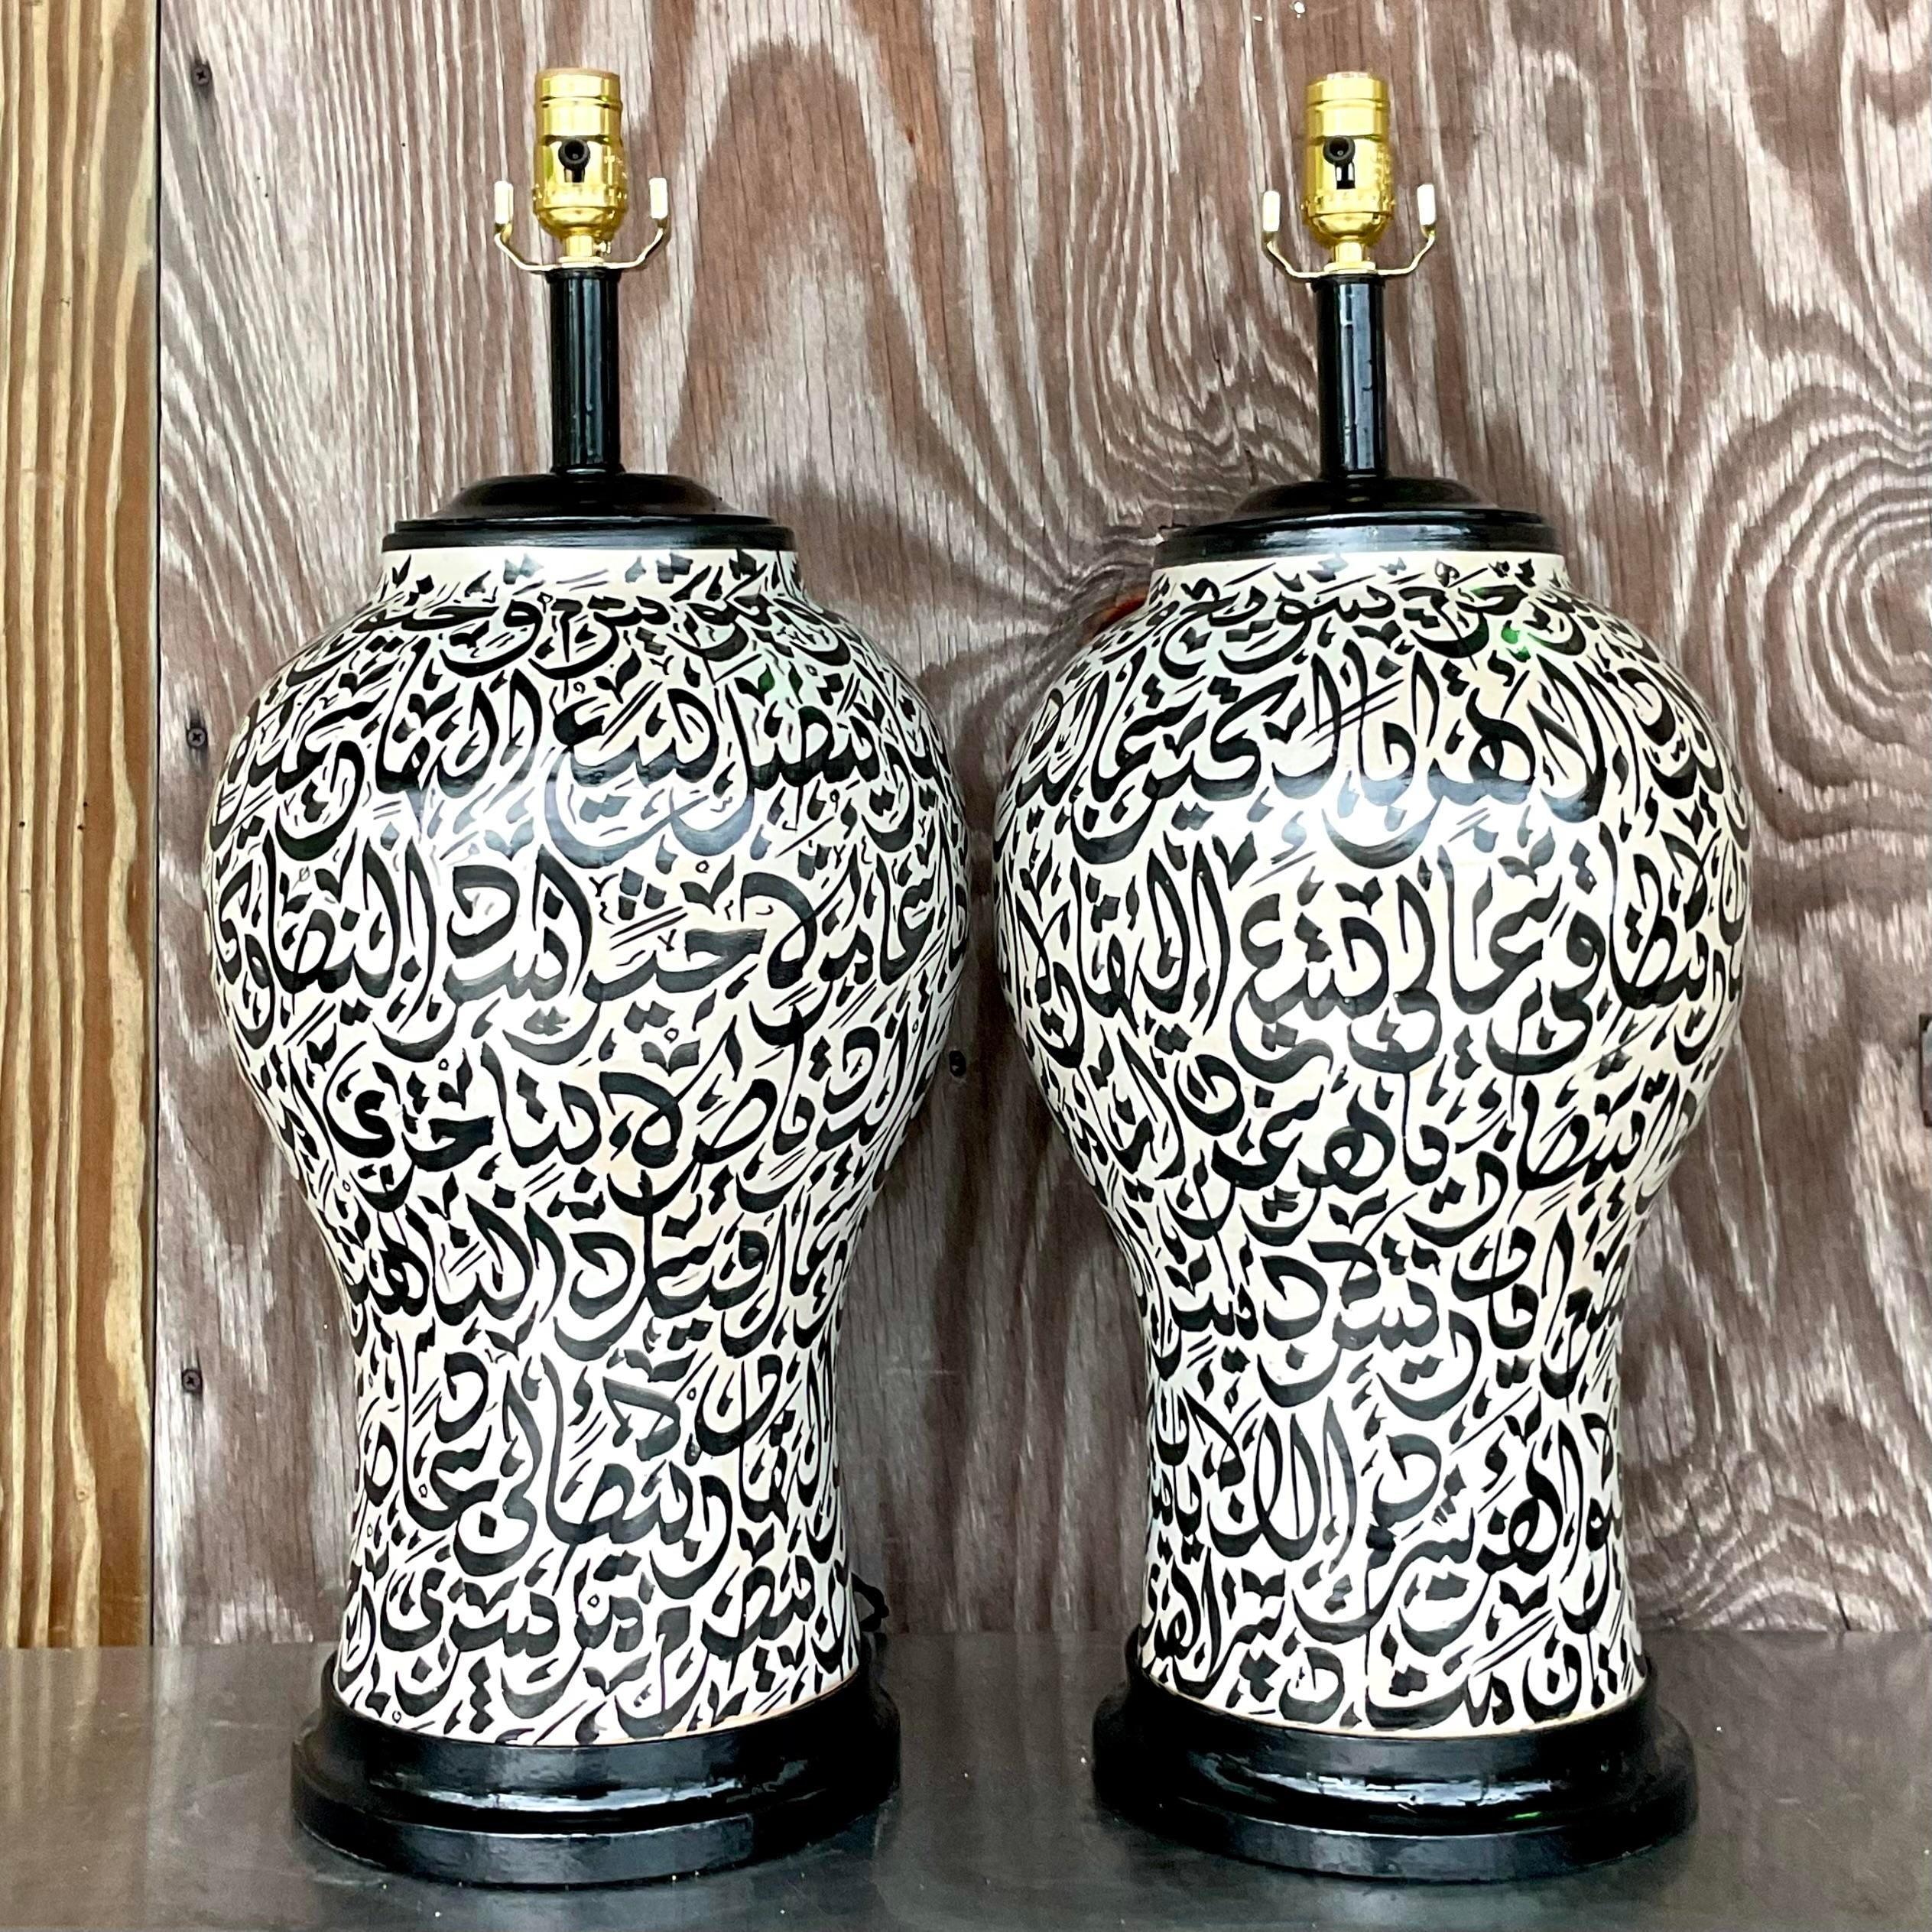 A fantastic pair of vintage Boho table lamps. A chic graphic design with a matte glazed finish. Fully restored with all new hardware, wiring and plinths. Acquired from a Palm Beach estate.